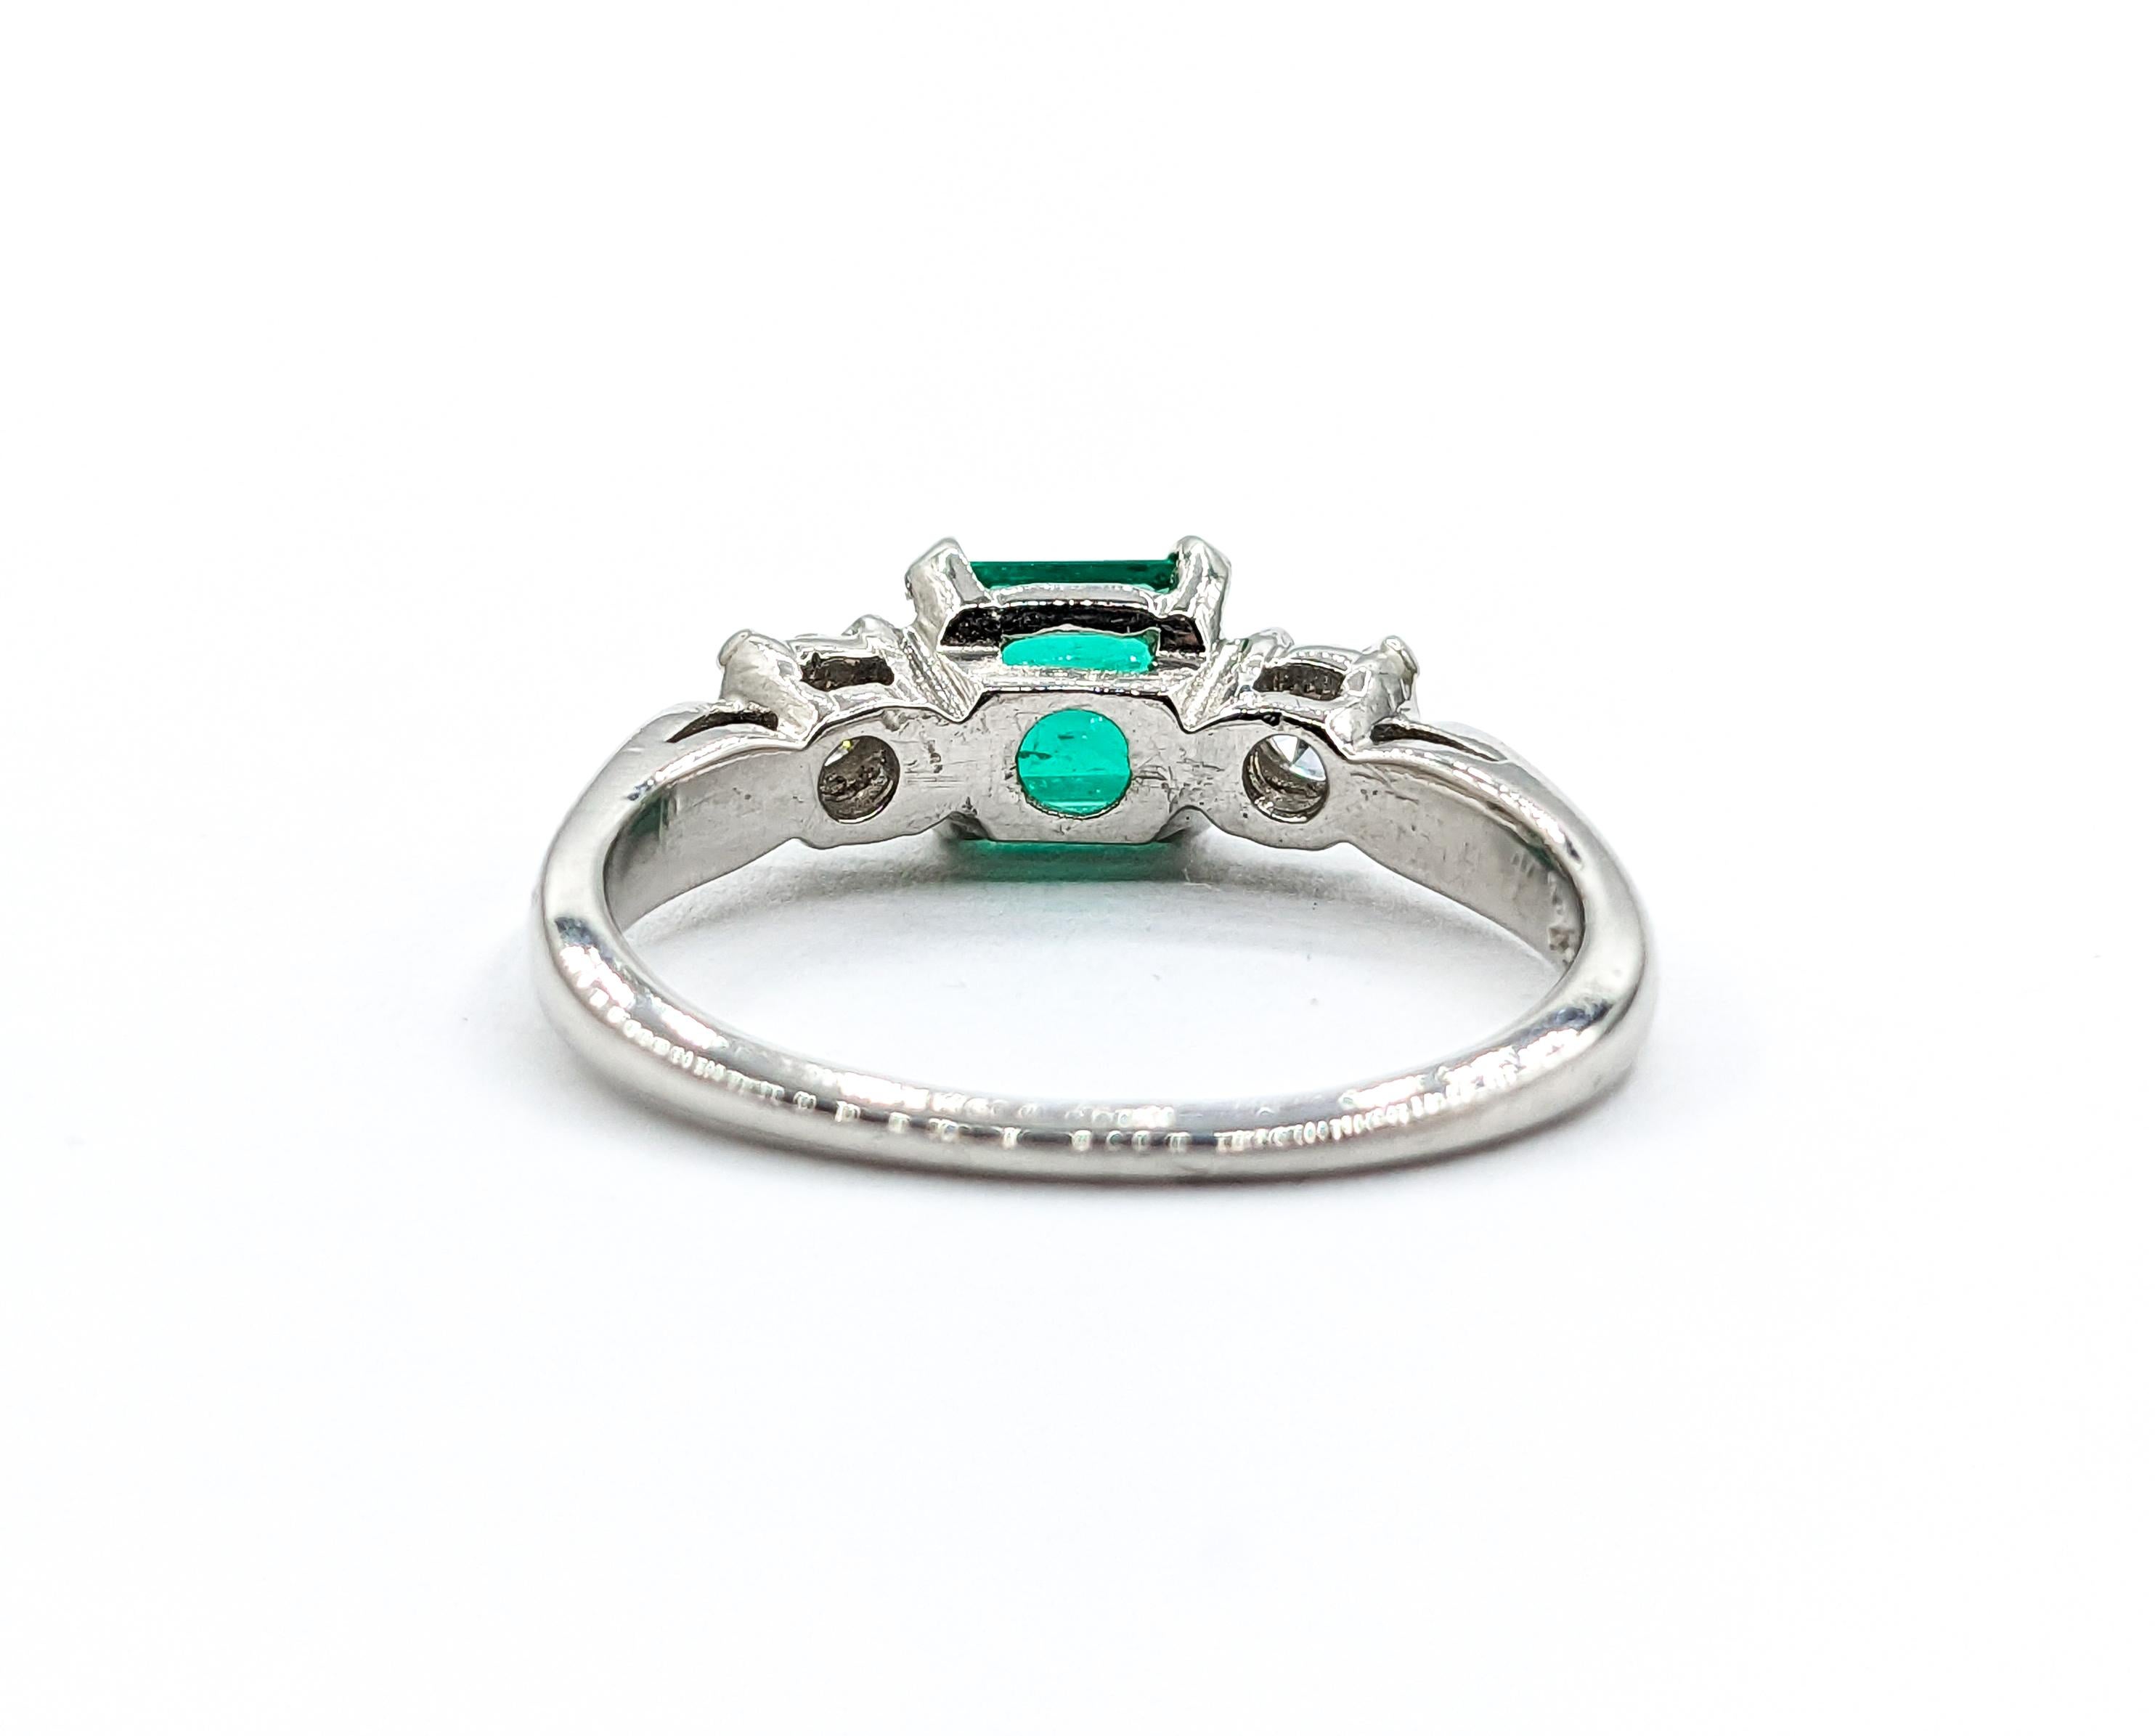 Stunning Colombian Emerald & Diamond Platinum Ring

Experience the timeless elegance of this stunning ring, meticulously crafted in 900pt platinum and adorned with 0.16 carat total weight of breathtaking diamonds with SI2 clarity and G color grade.